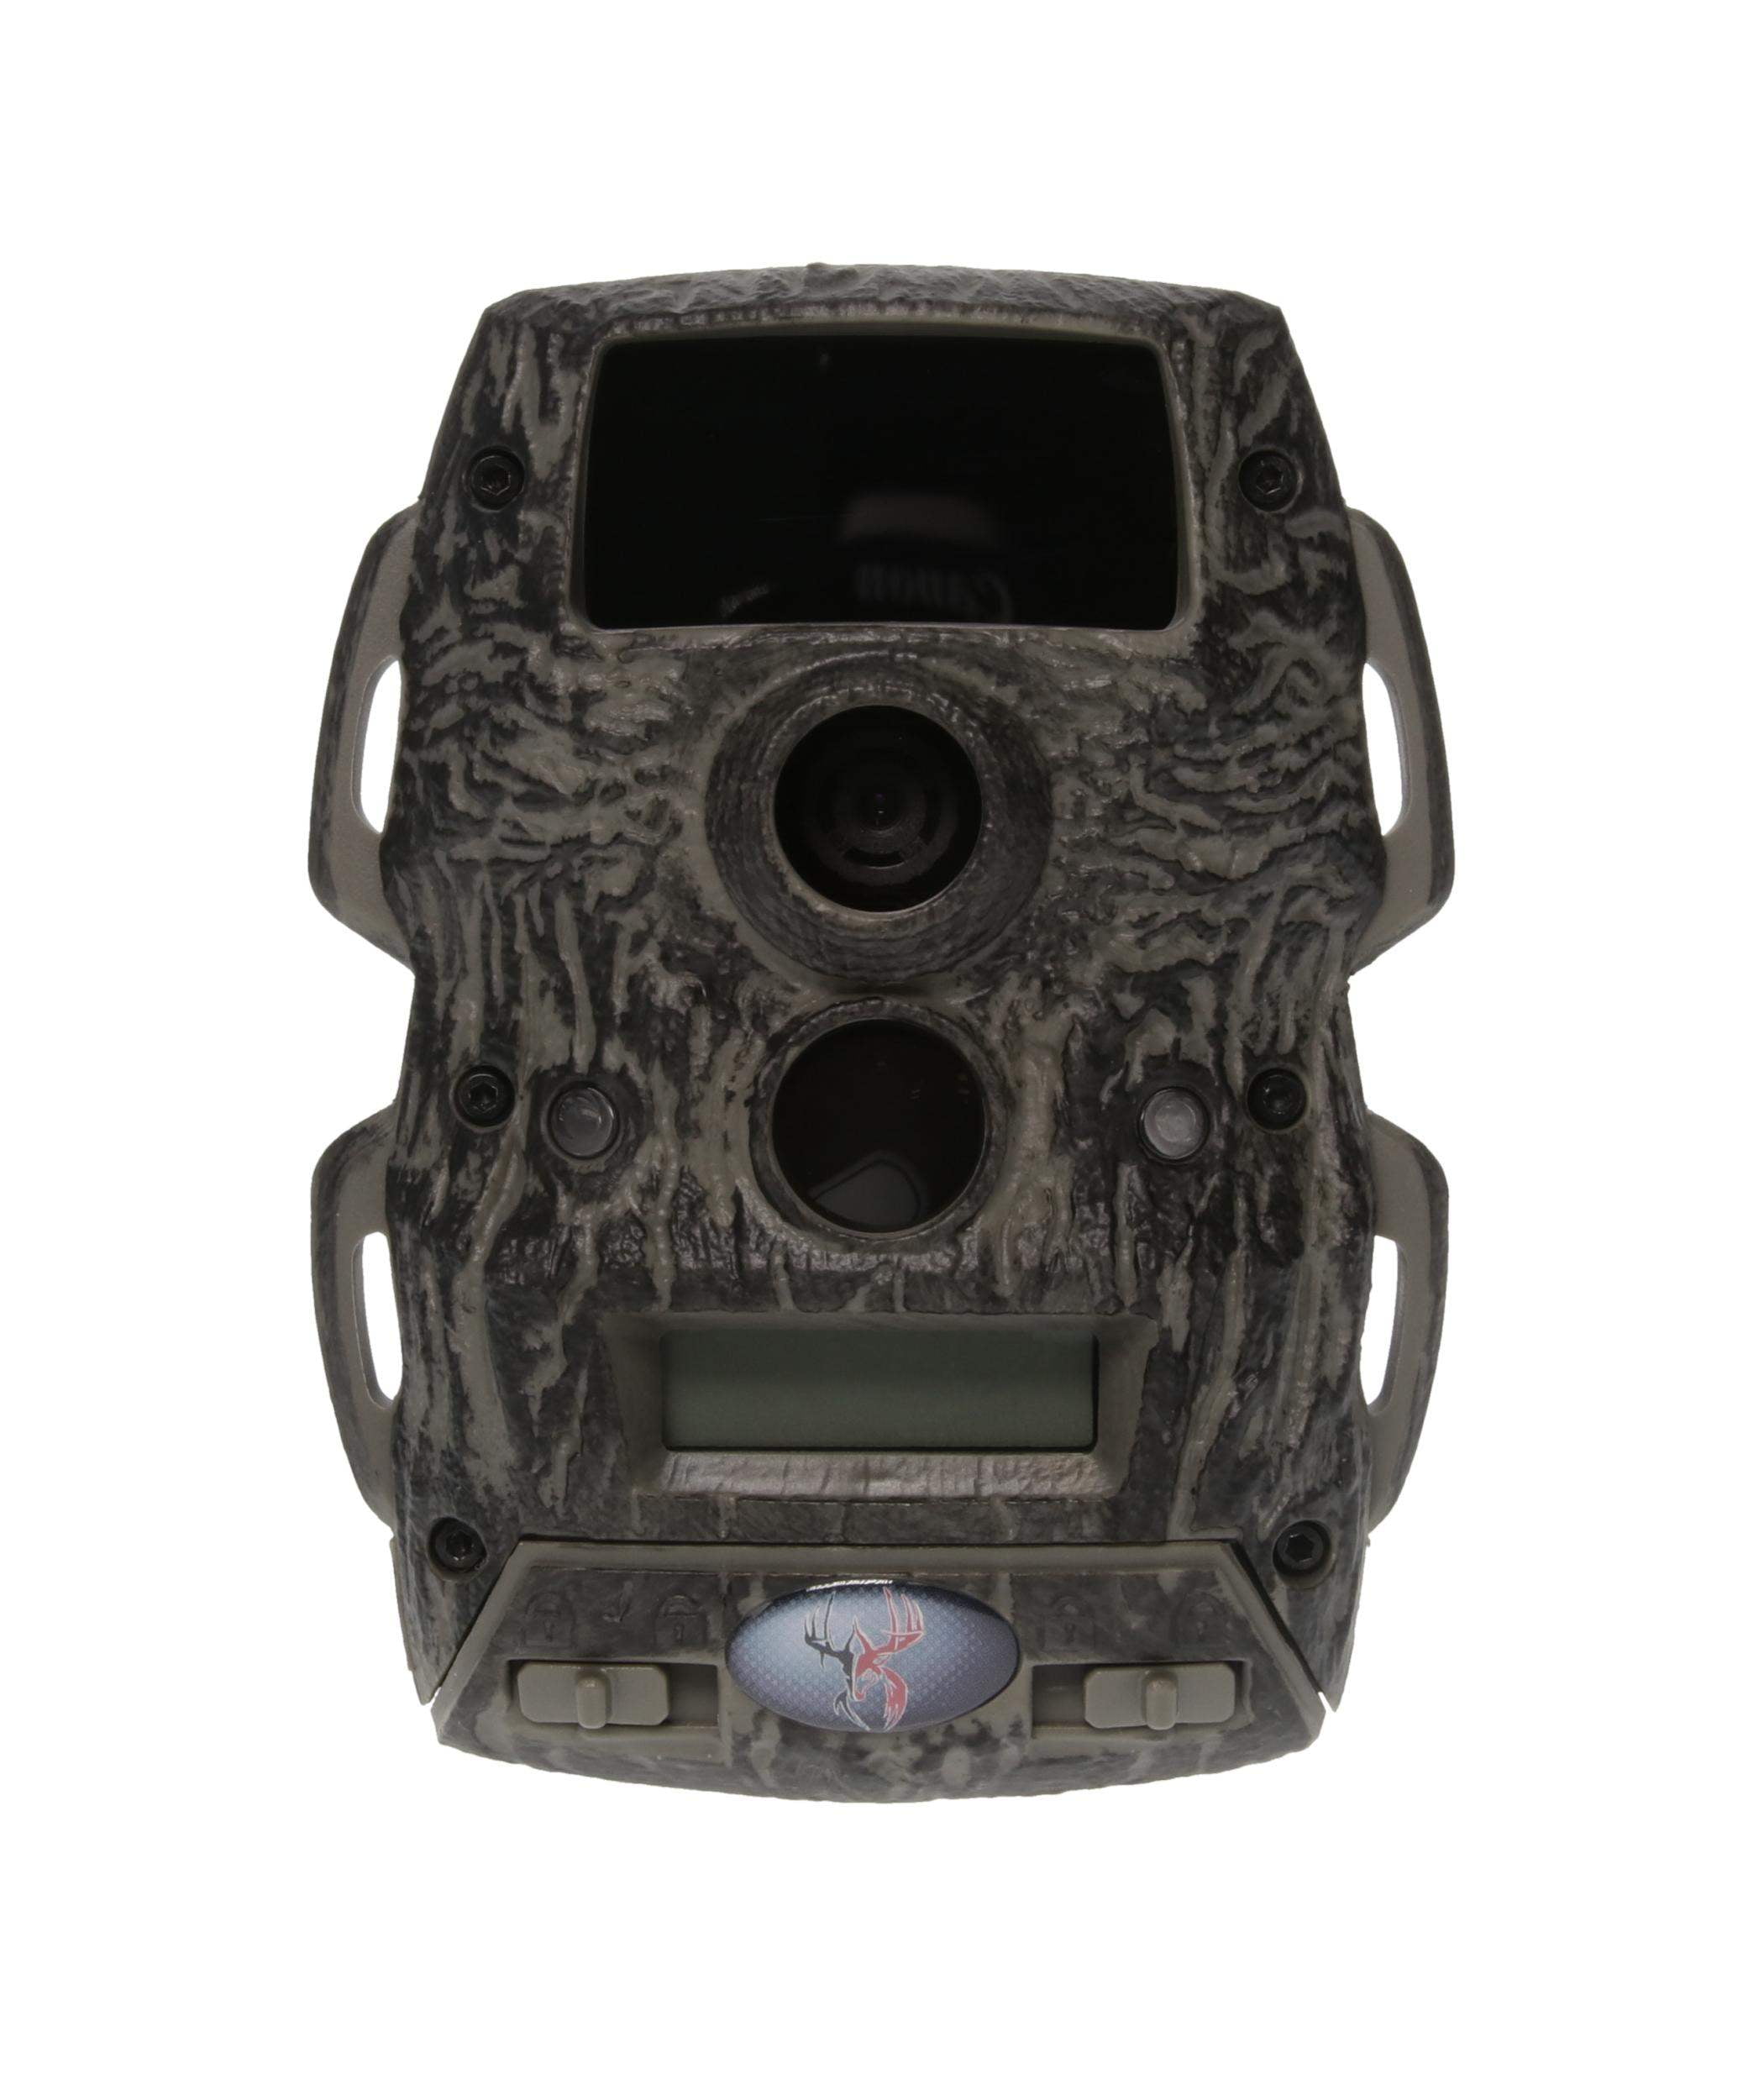 for sale online Wildgame Innovations Cloak Pro 16mp Game Camera with Batteries WR16i8W26 